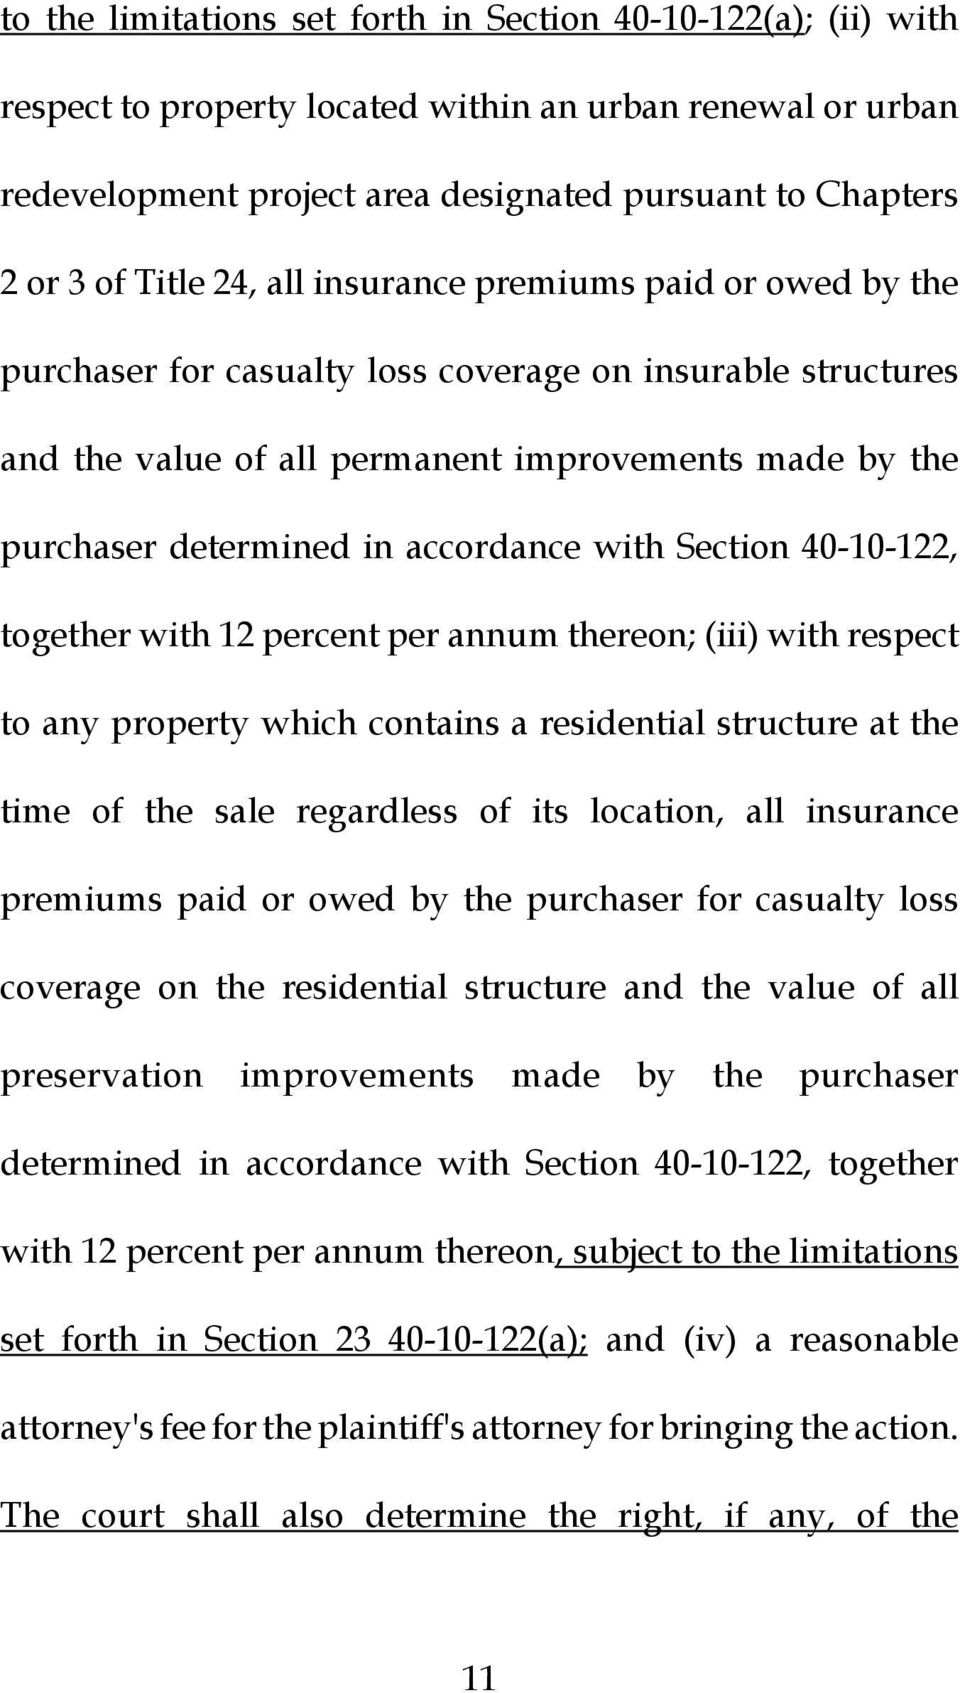 with Section 40-10-122, together with 12 percent per annum thereon; (iii) with respect to any property which contains a residential structure at the time of the sale regardless of its location, all